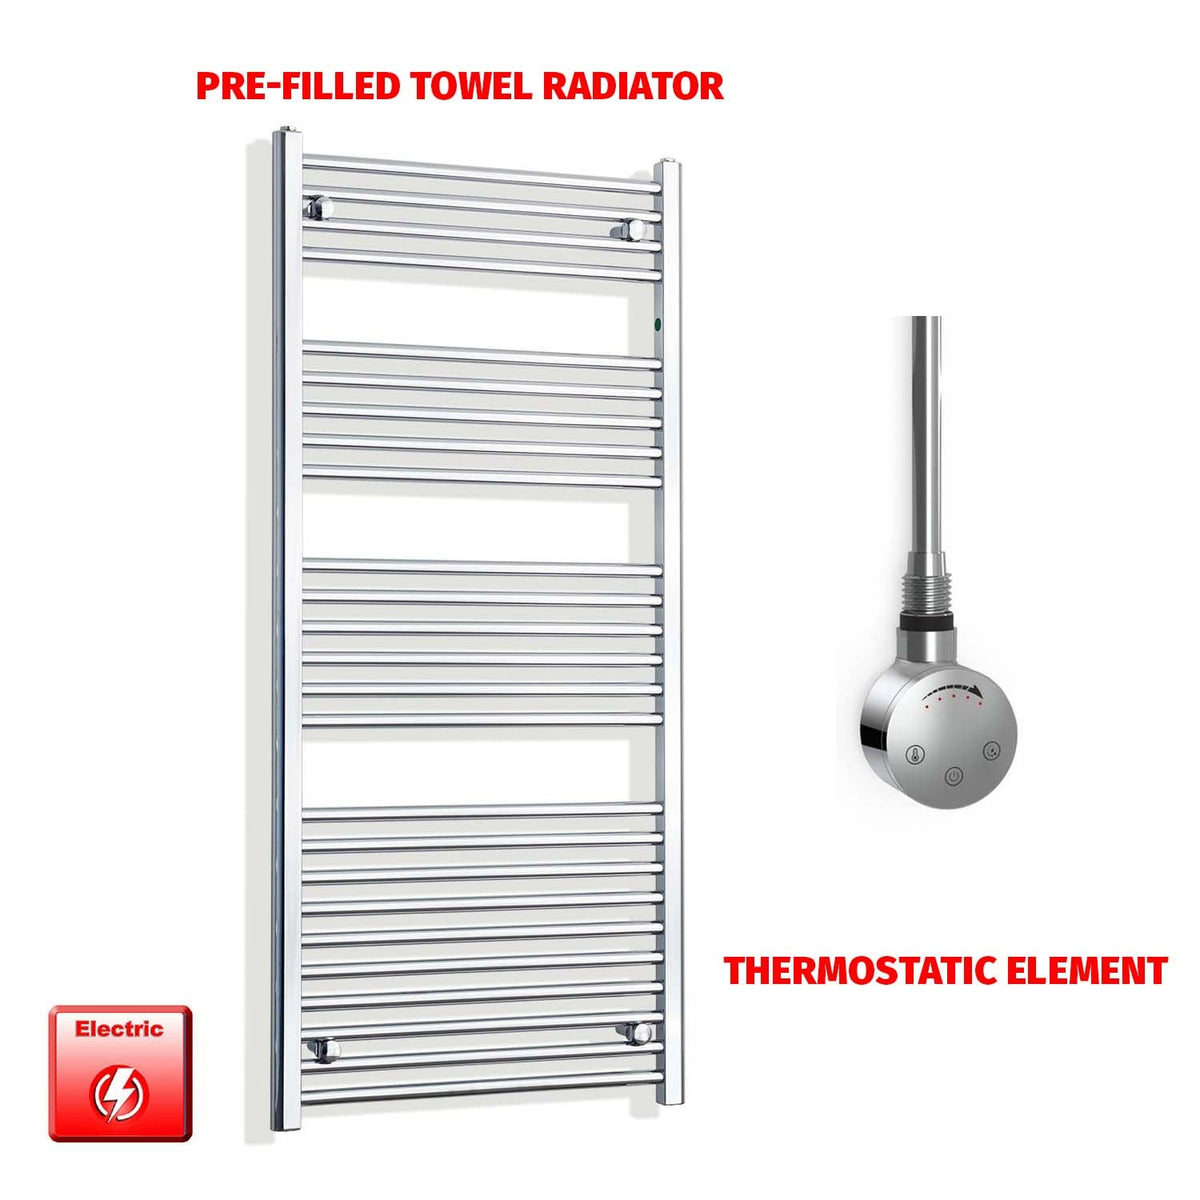 1400mm High 550mm Wide Pre-Filled Electric Heated Towel Radiator Straight Chrome SMR Thermostatic element no timer